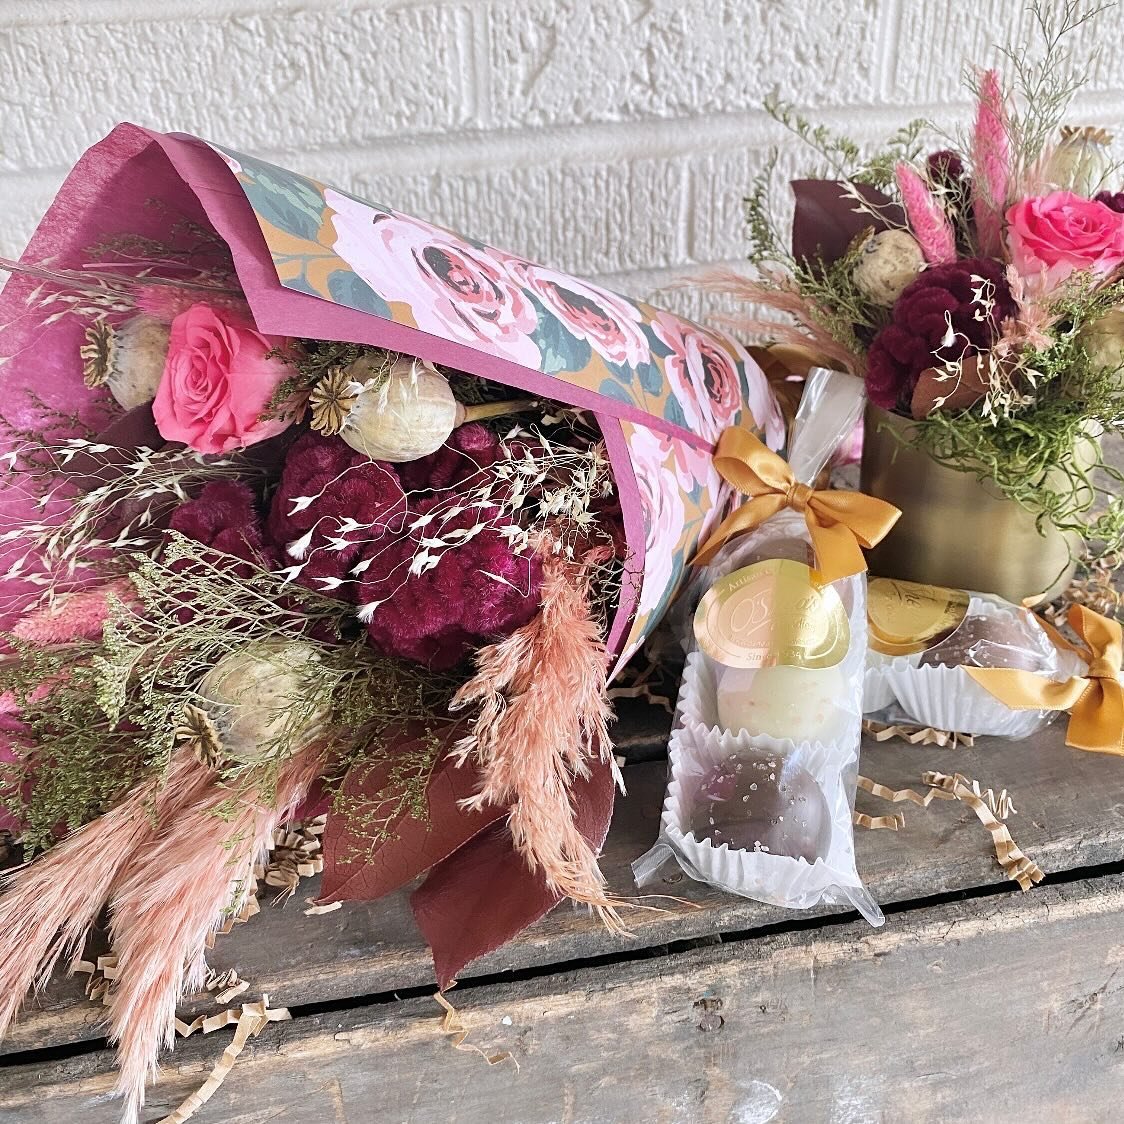 Mother&rsquo;s Day gift suites now available, featuring fourth generation chocolate company O&rsquo;Shea&rsquo;s Candies, based in Johnstown, PA 🌸🍫 
.
.
.
#fruitandflower #flowershop #driedflowers #preservedflowers #flowersandchocolate #mothersday 